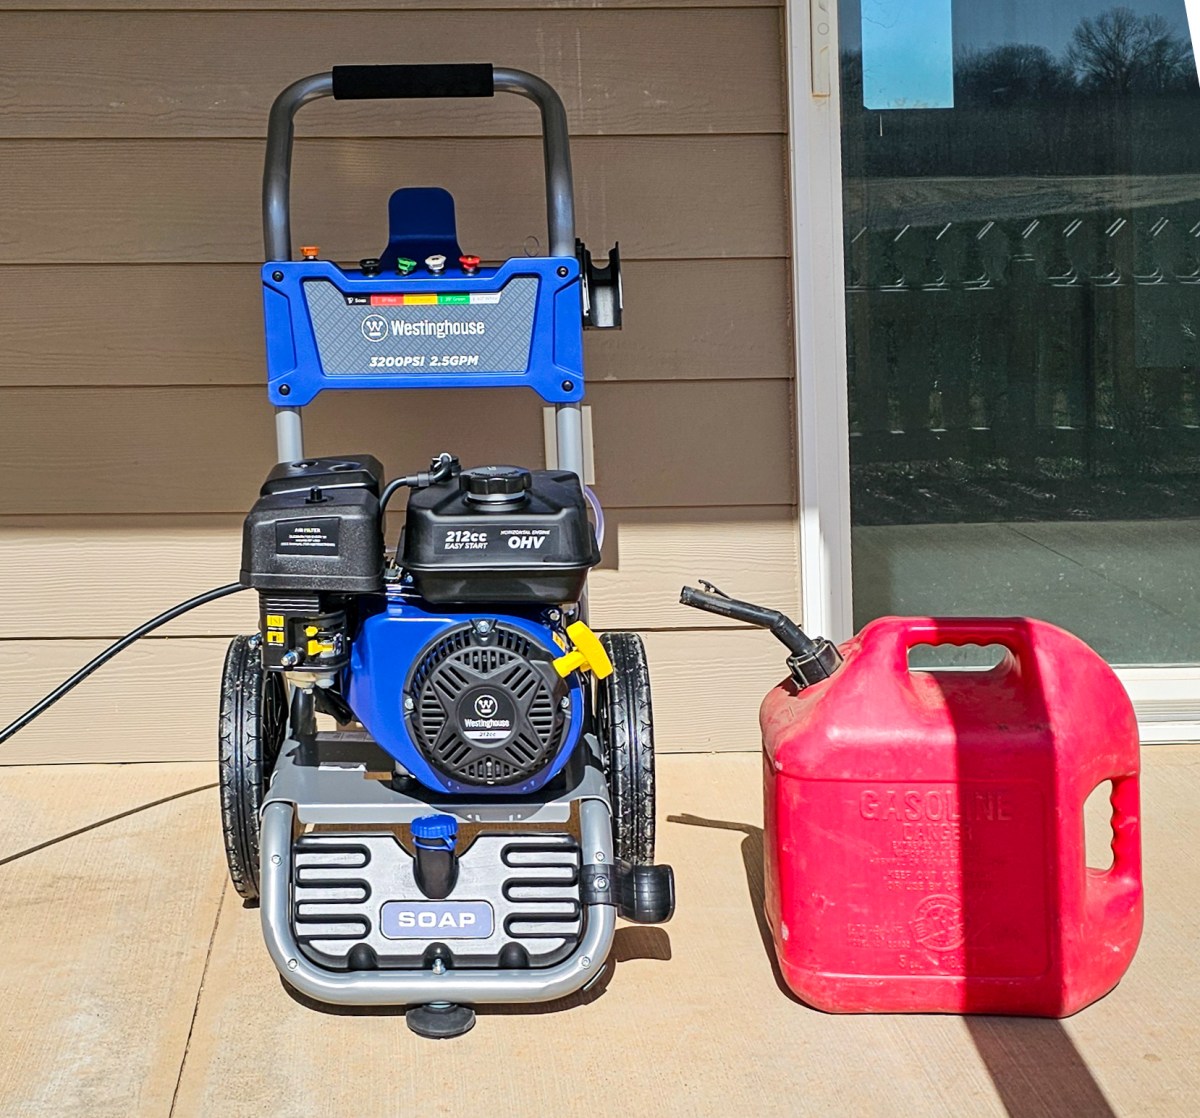 The Westinghouse WPX2700 Pressure Washer next to a gas can before testing.